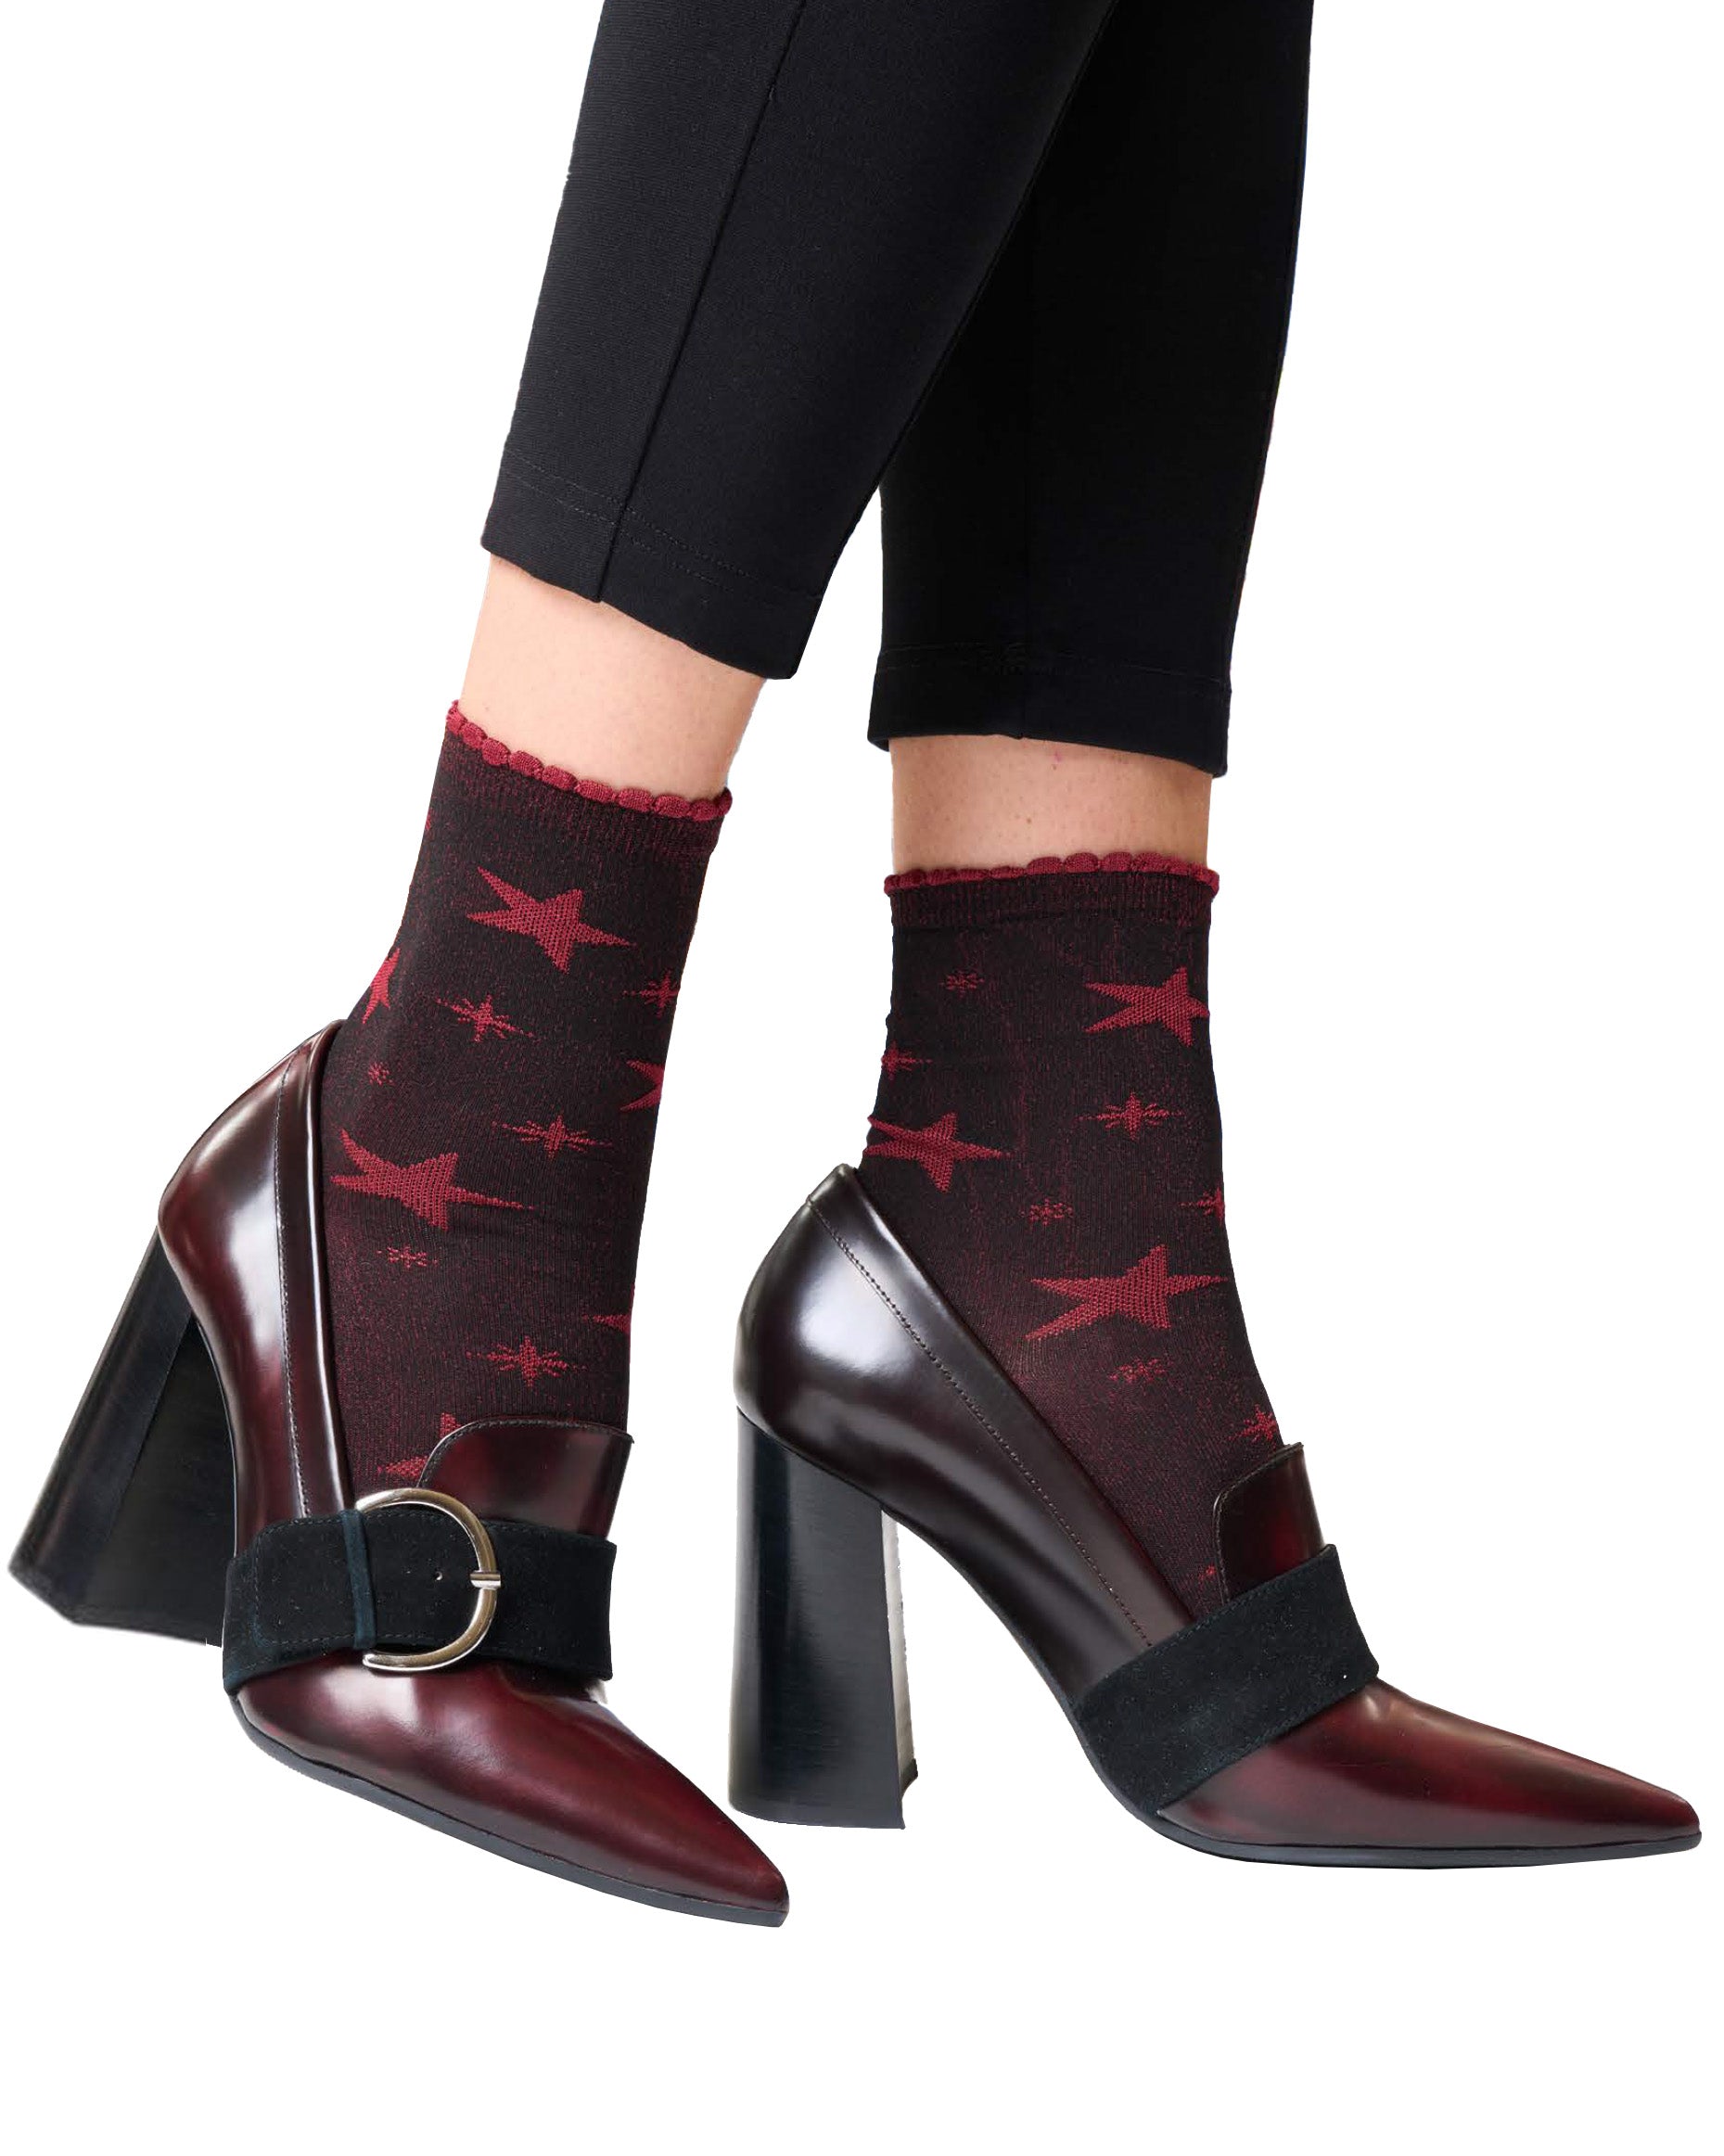 SiSi Star Calzino - Black and red coloured light viscose mix ankle socks with all over star pattern and scalloped edge cuff.